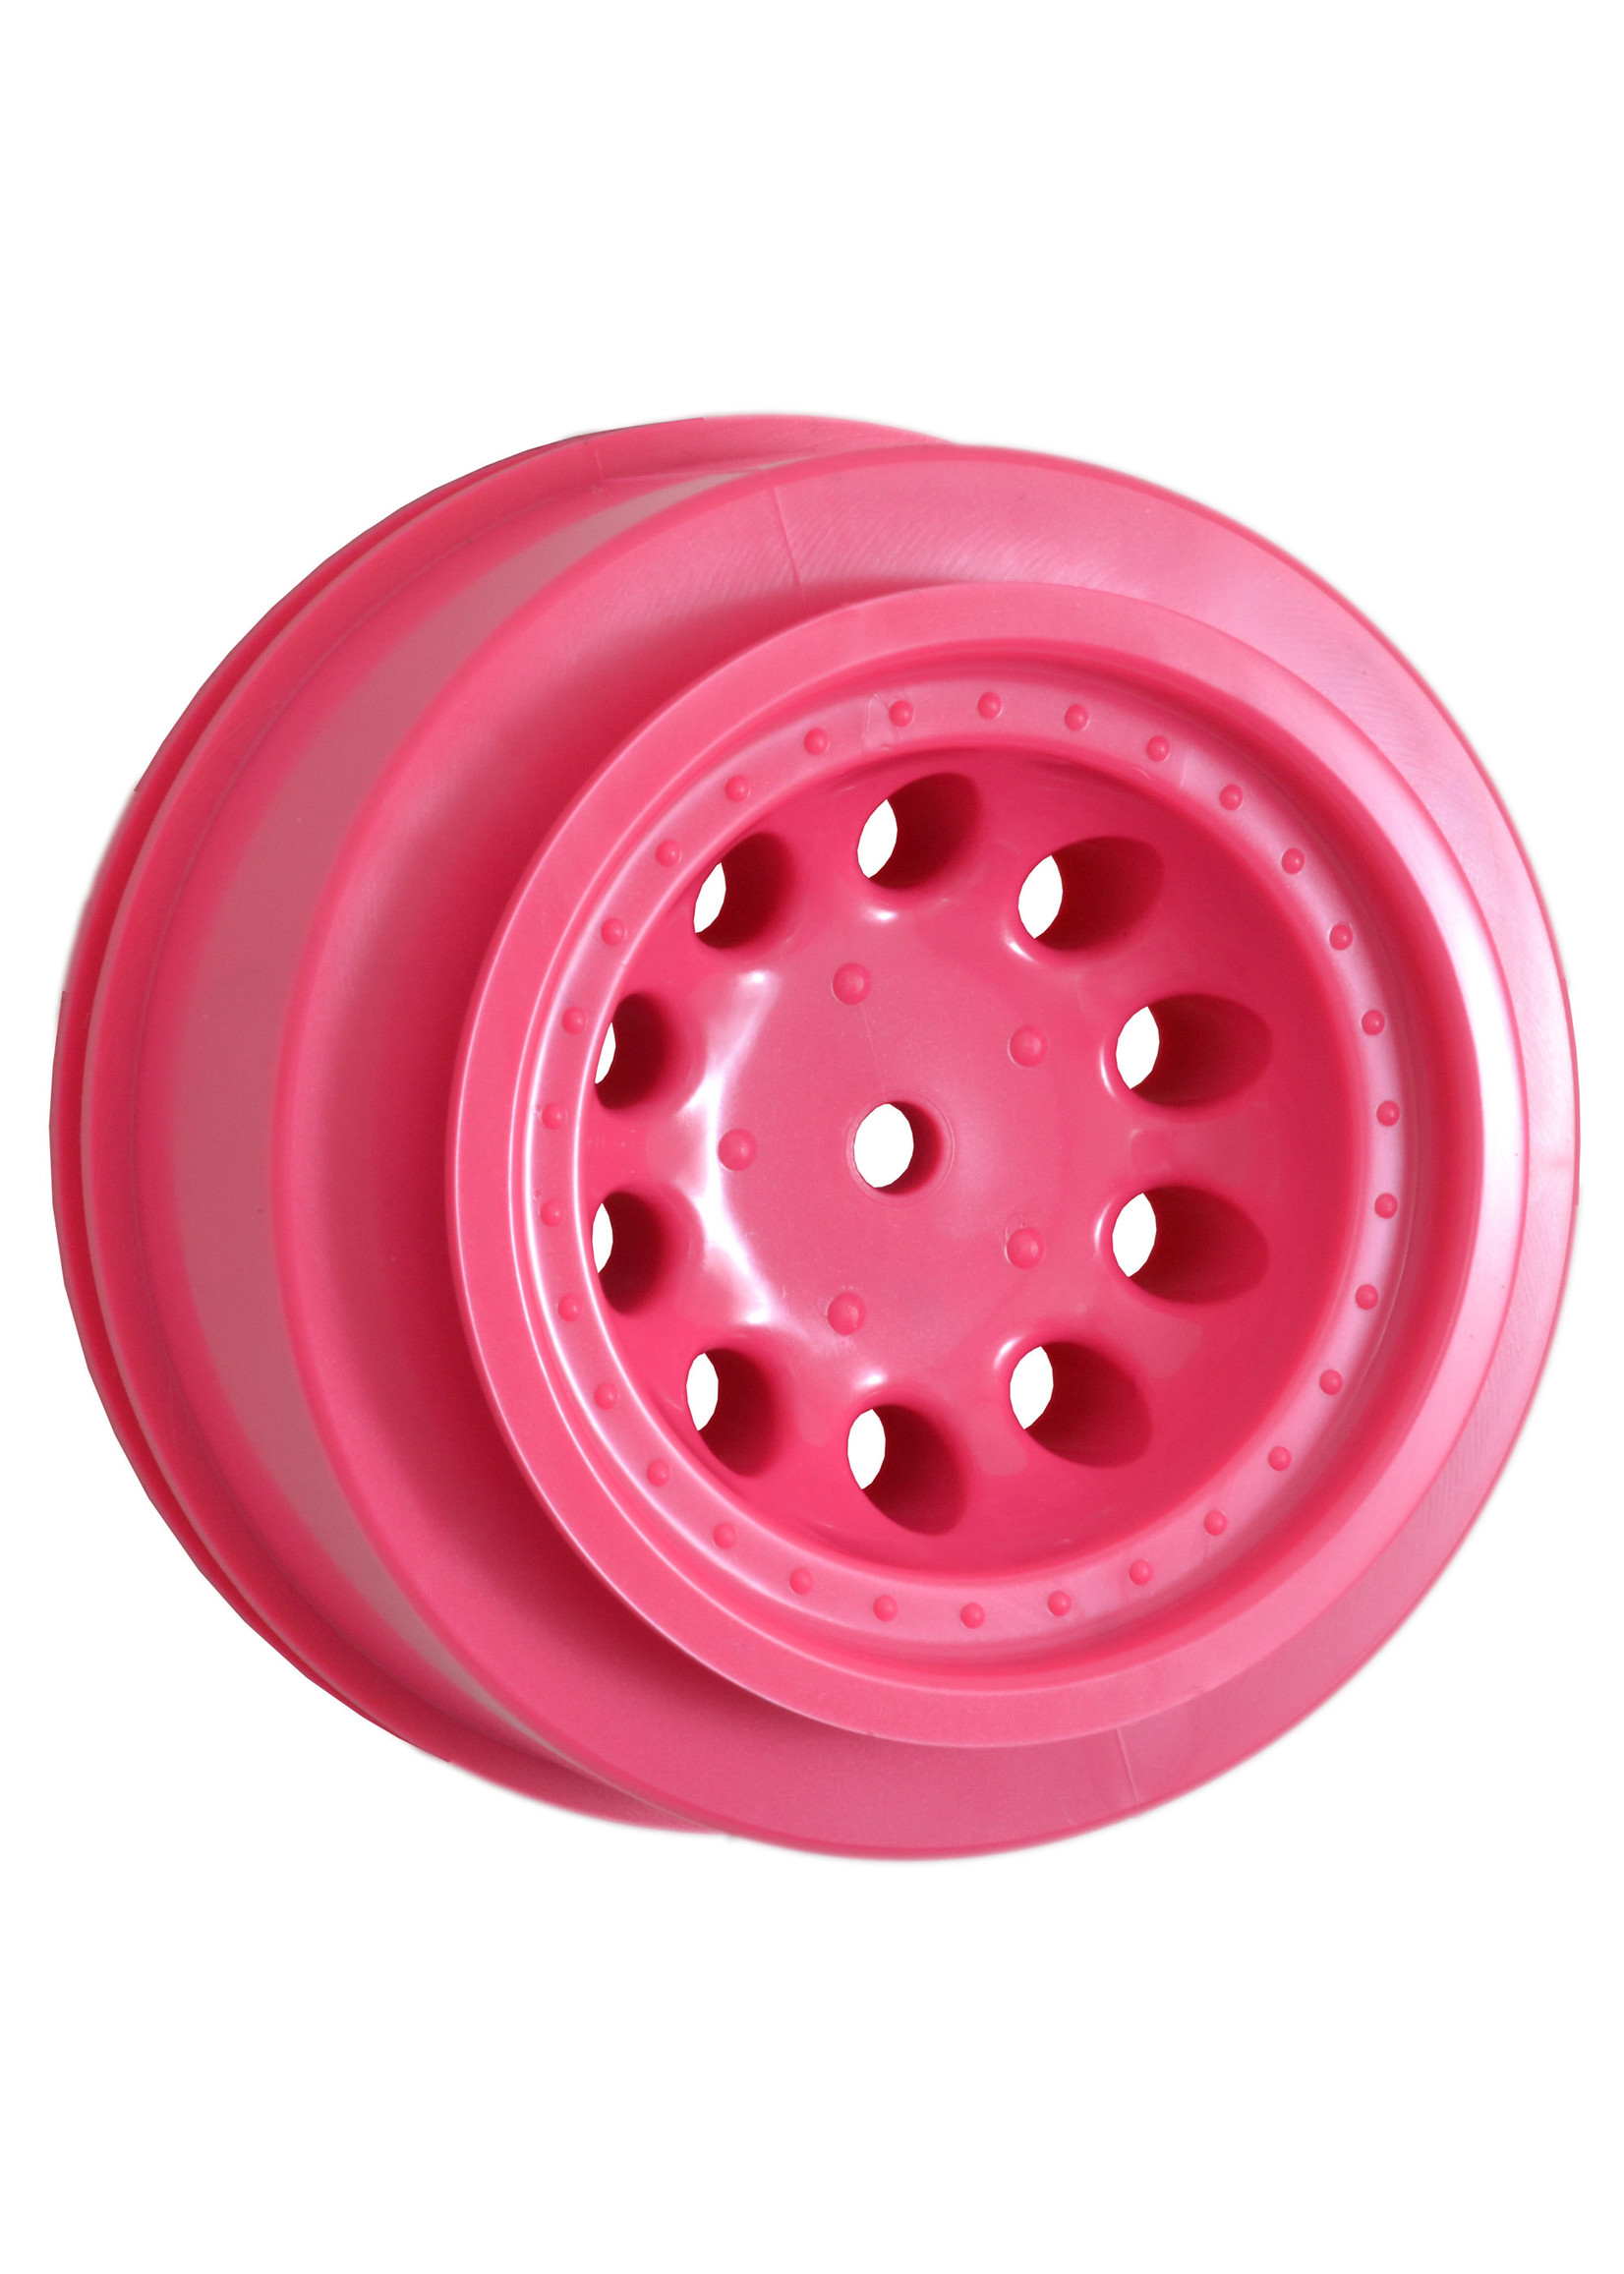 RPM RPM82337 RPM Revolver Short Course Wheels, Pink, for Traxxas Slash (2wd/4x4) Front or Rear